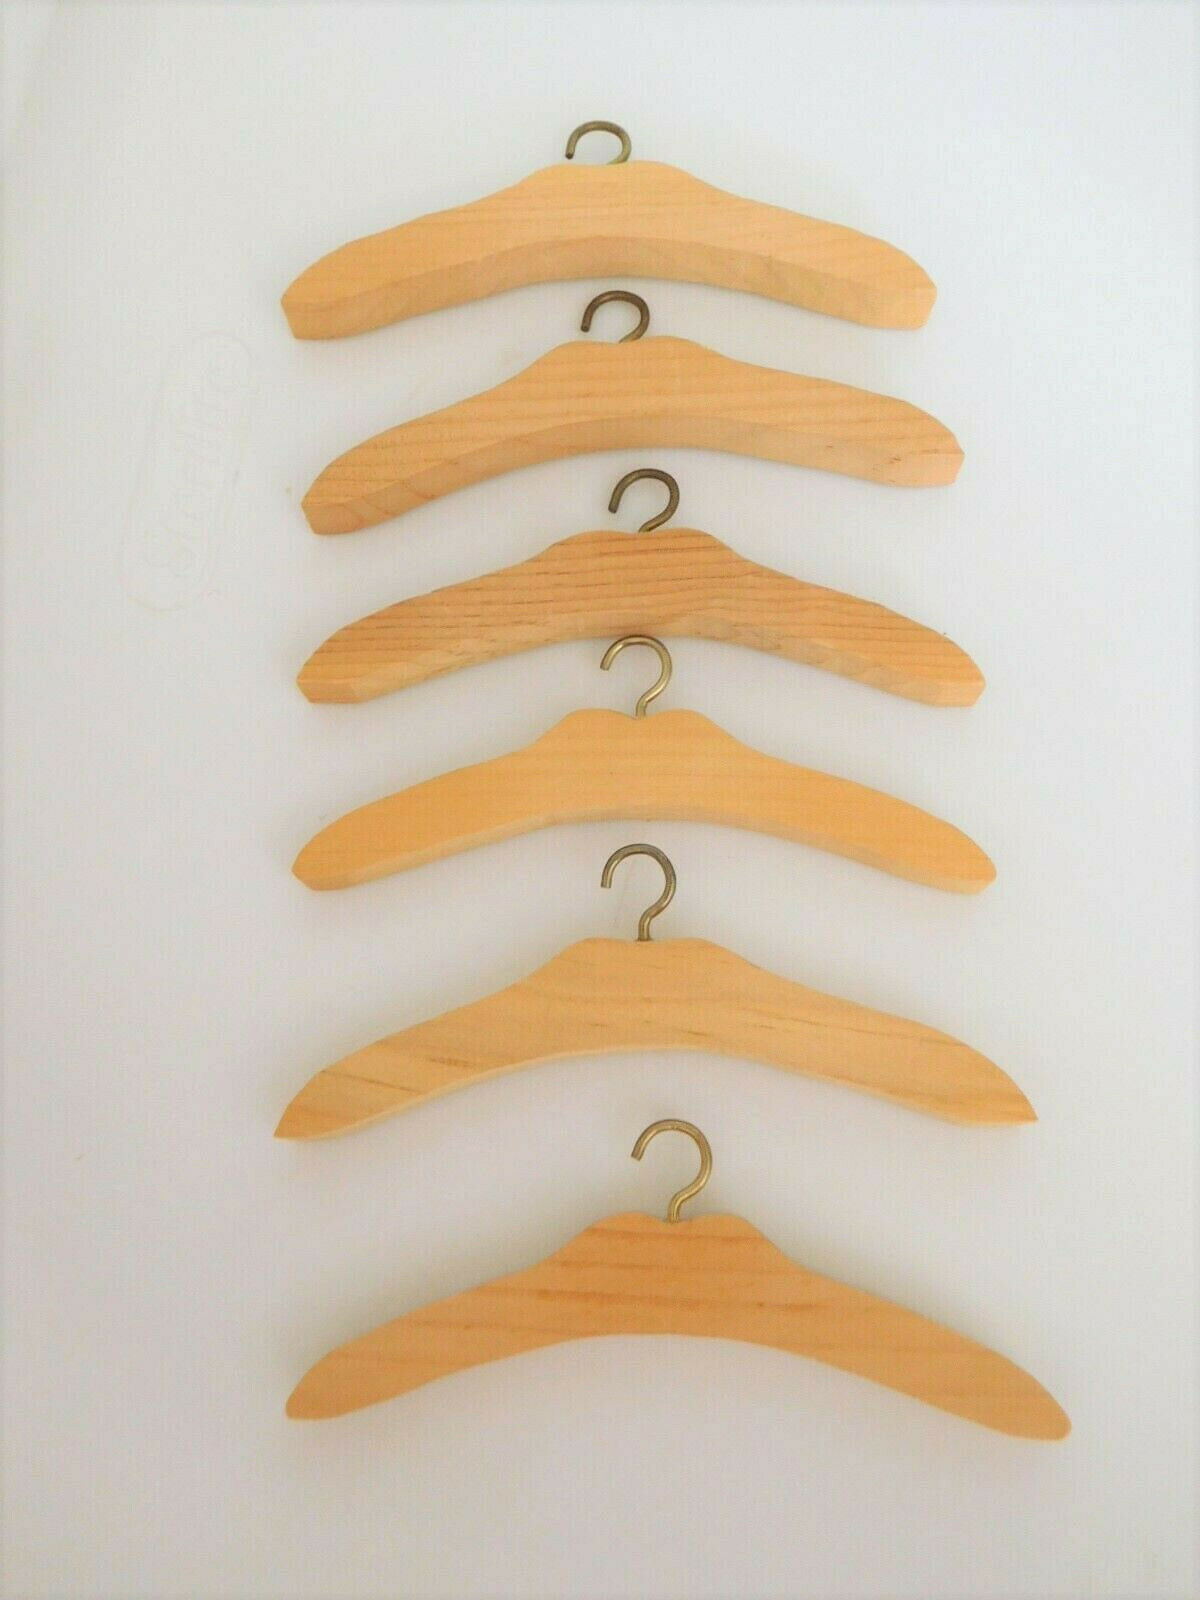  Lot of 6 Wood Doll Clothes Hangers 6" Wide American Girl Etc.  - $9.99